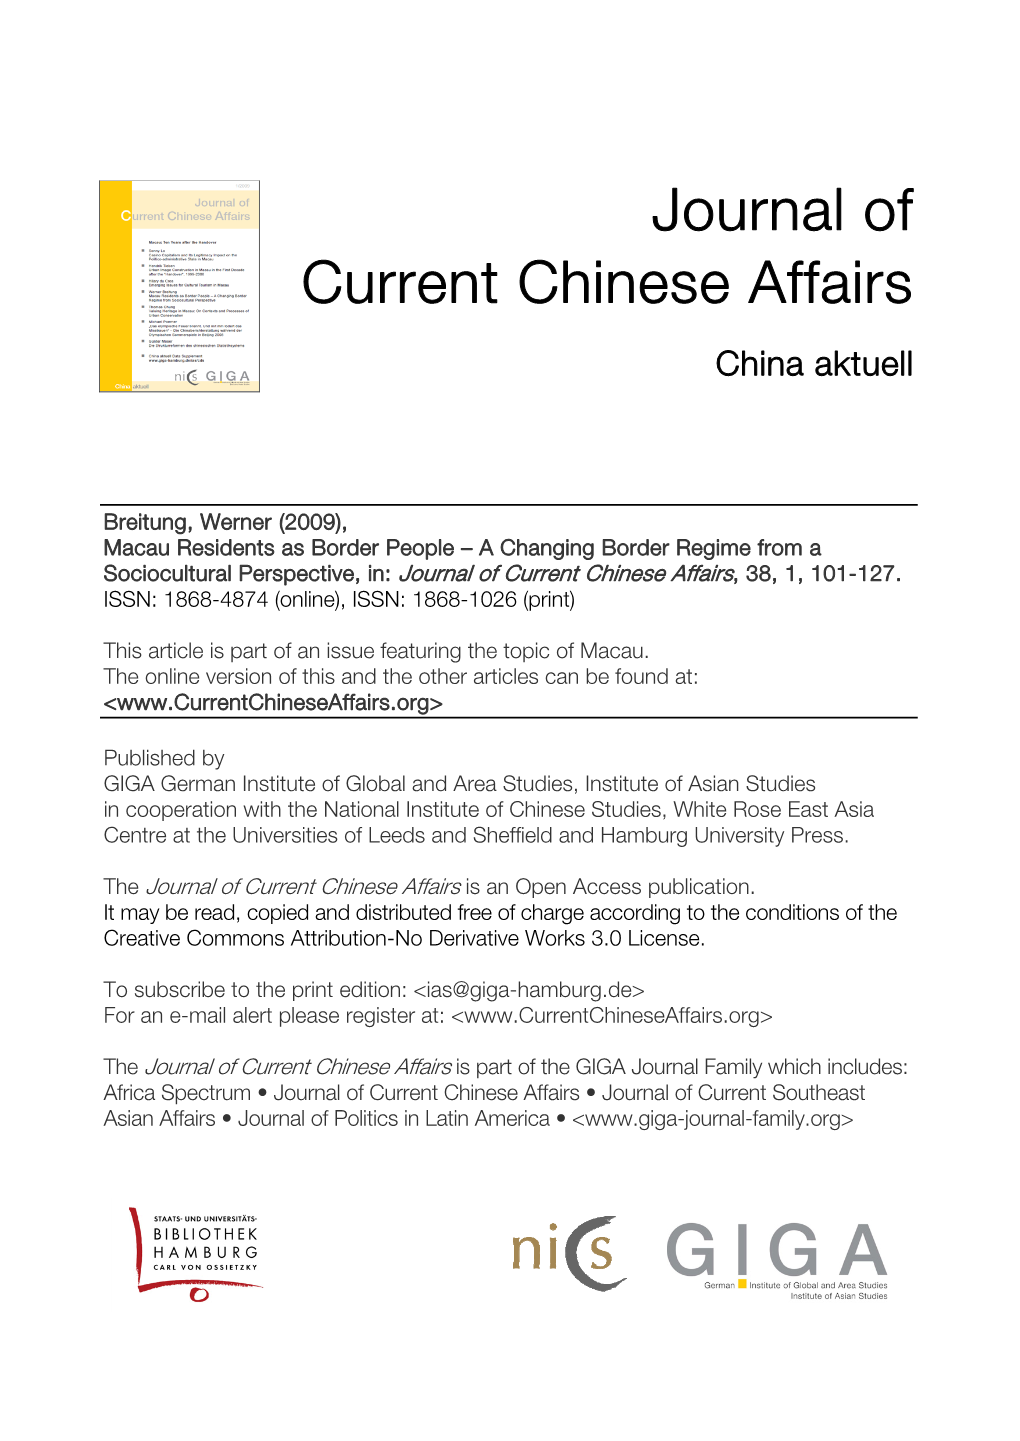 A Changing Border Regime from a Sociocultural Perspective, In: Journal of Current Chinese Affairs, 38, 1, 101-127